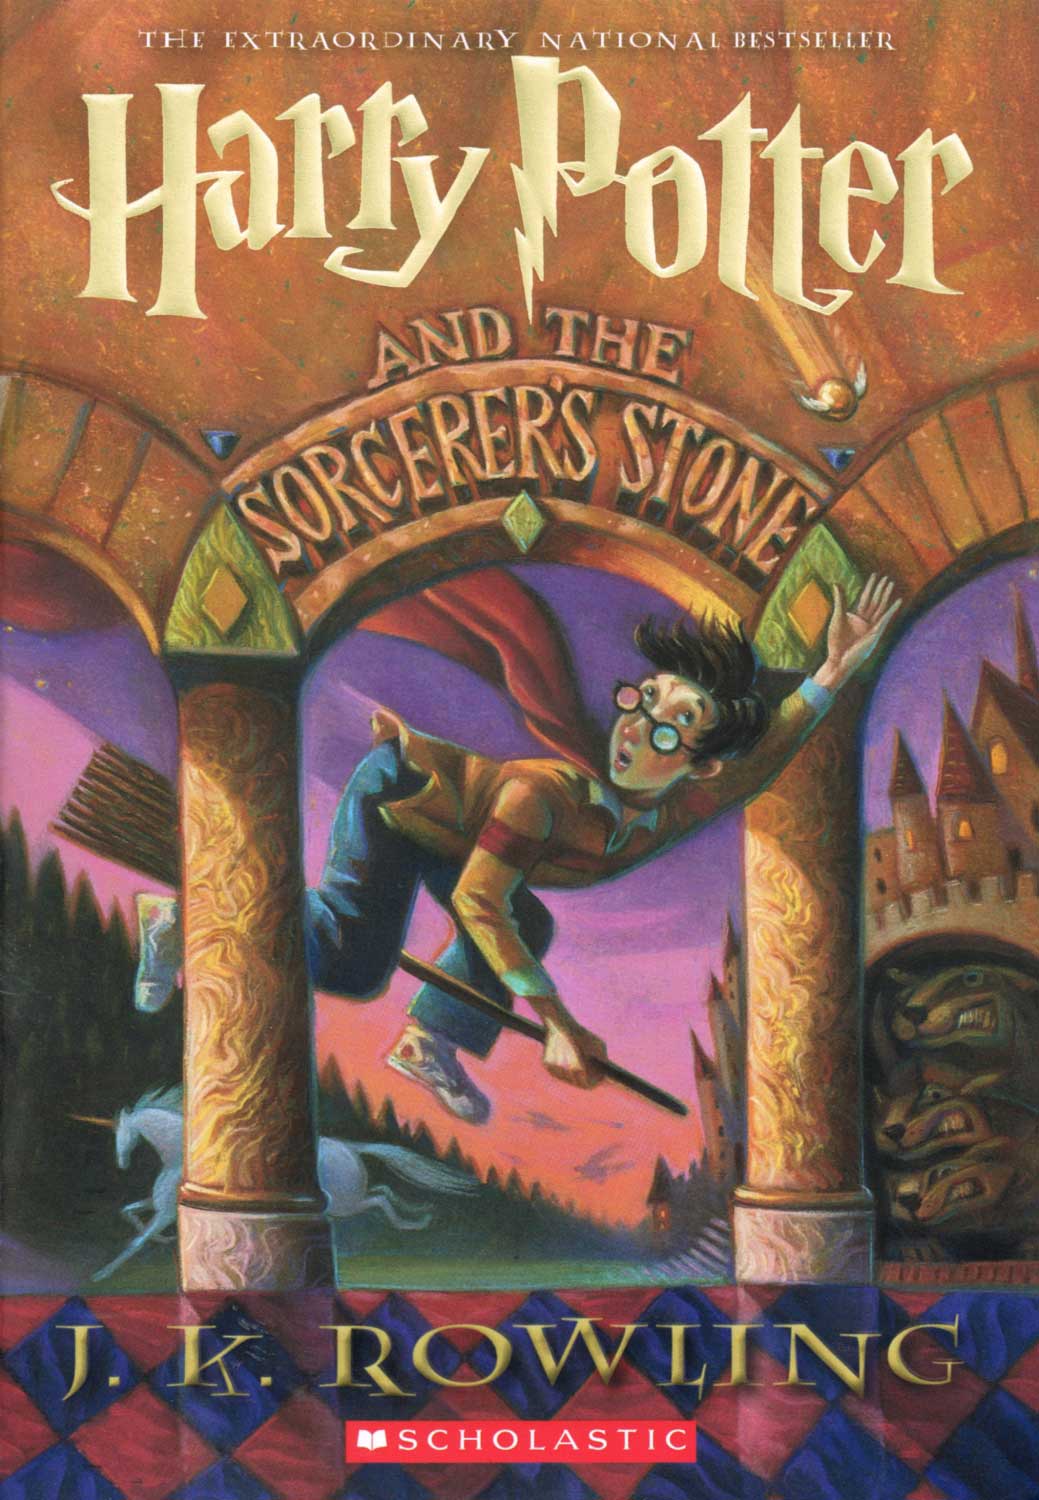 Harry Potter (series), by J.K. Rowling. 
                              
                              
                              
                              What
                              more can be said about this iconic franchise? How about this: seven years after the final volume was published, readers young and old still go crazy at the slightest rumor of a new Potter story. 
                              
                              
                              Buy now: Harry Potter (series)